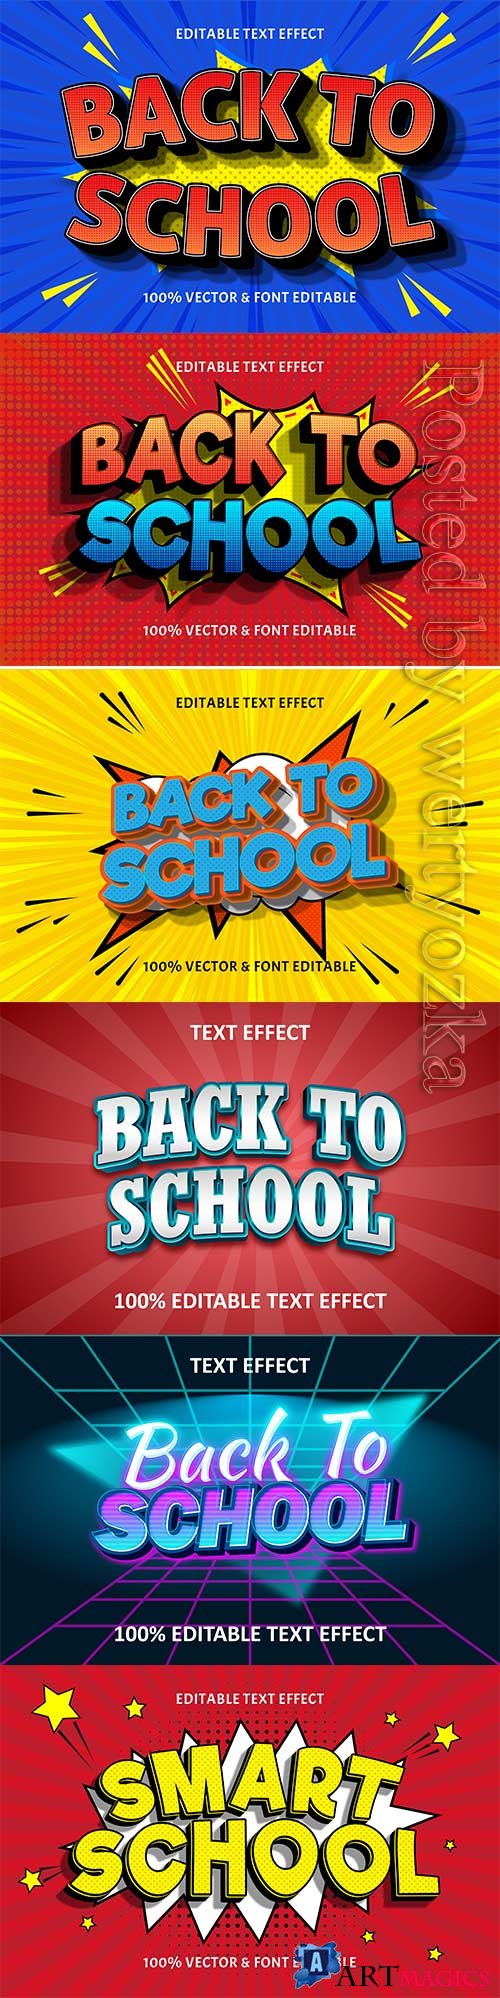 Back to school editable text effect vol 13